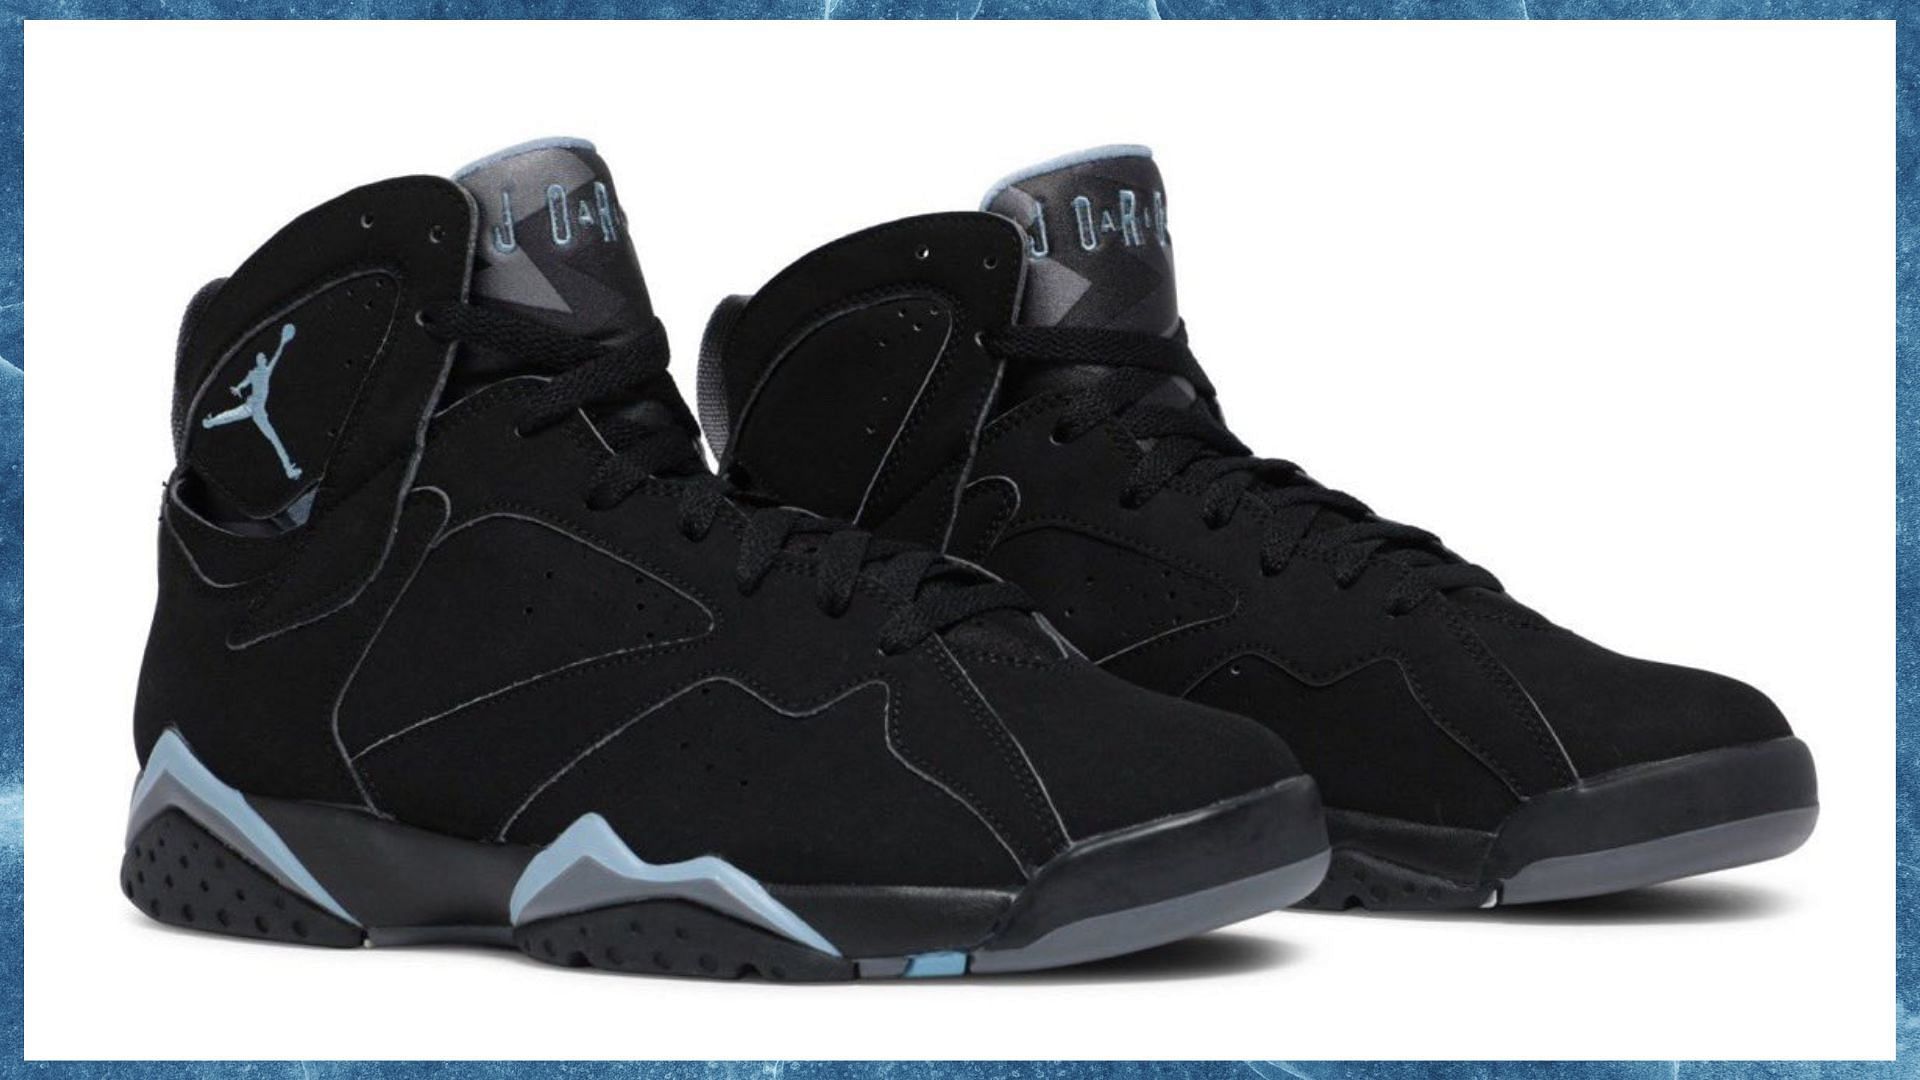 Where to buy Air Jordan 7 “Chambray” shoes? Price, release date, and